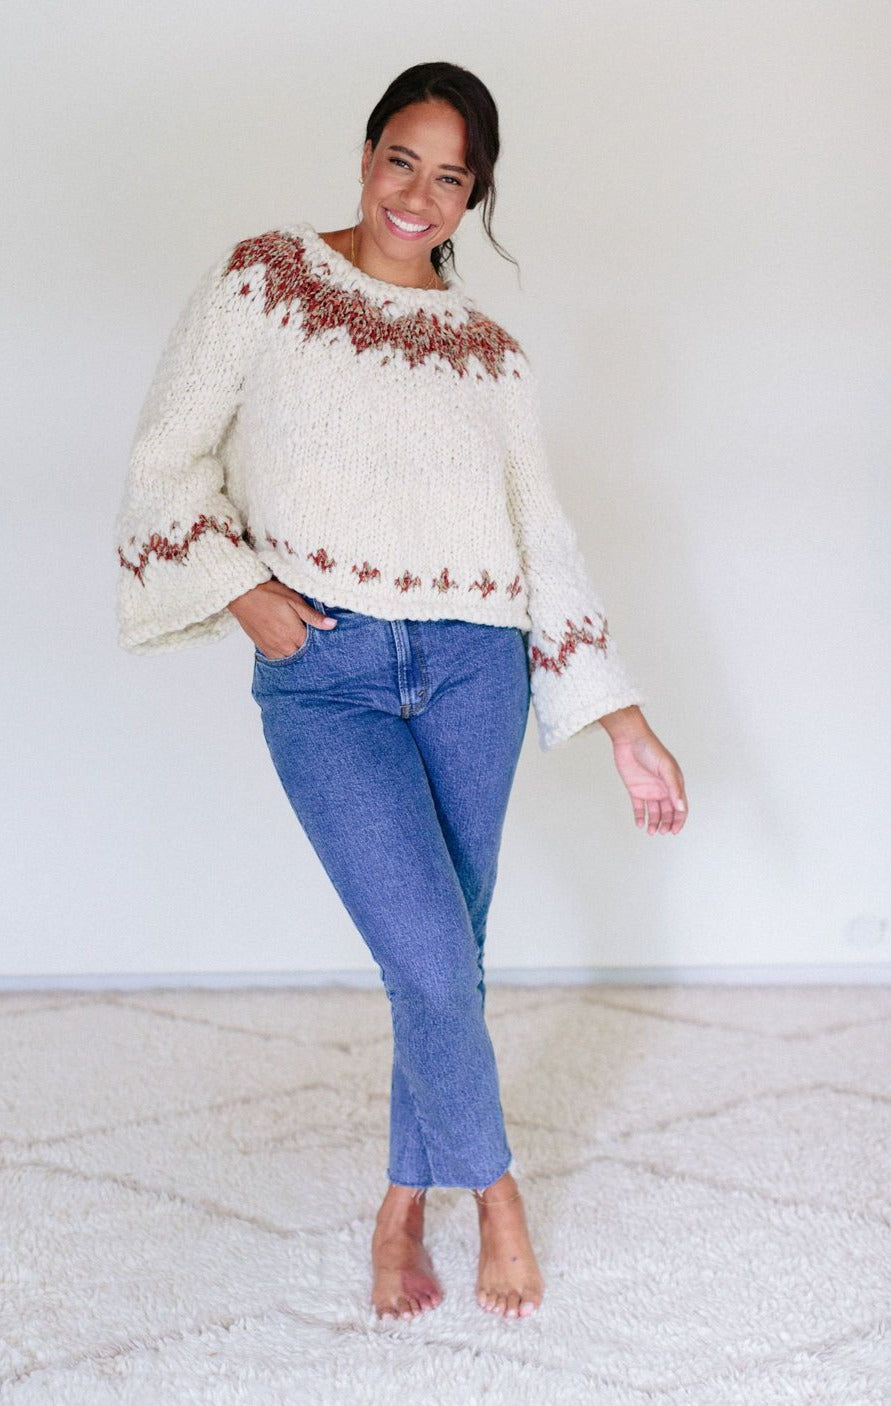 Exhale Sweater Pattern